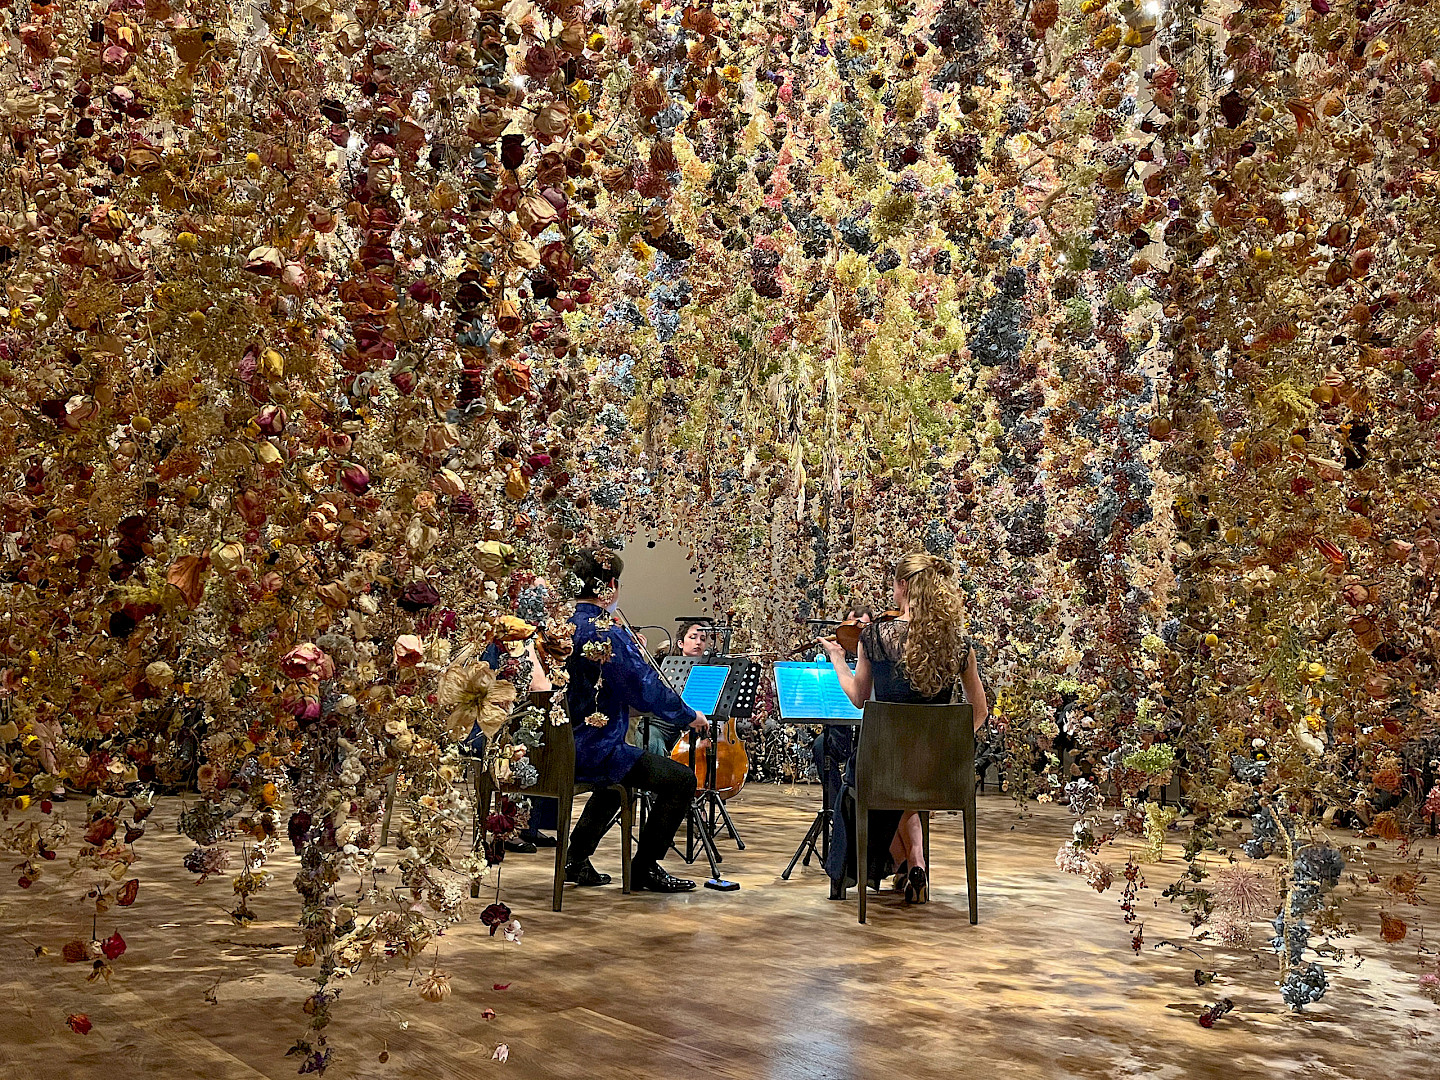 Musicians inside the floral installation "Calyx" by Rebecca Louise Law